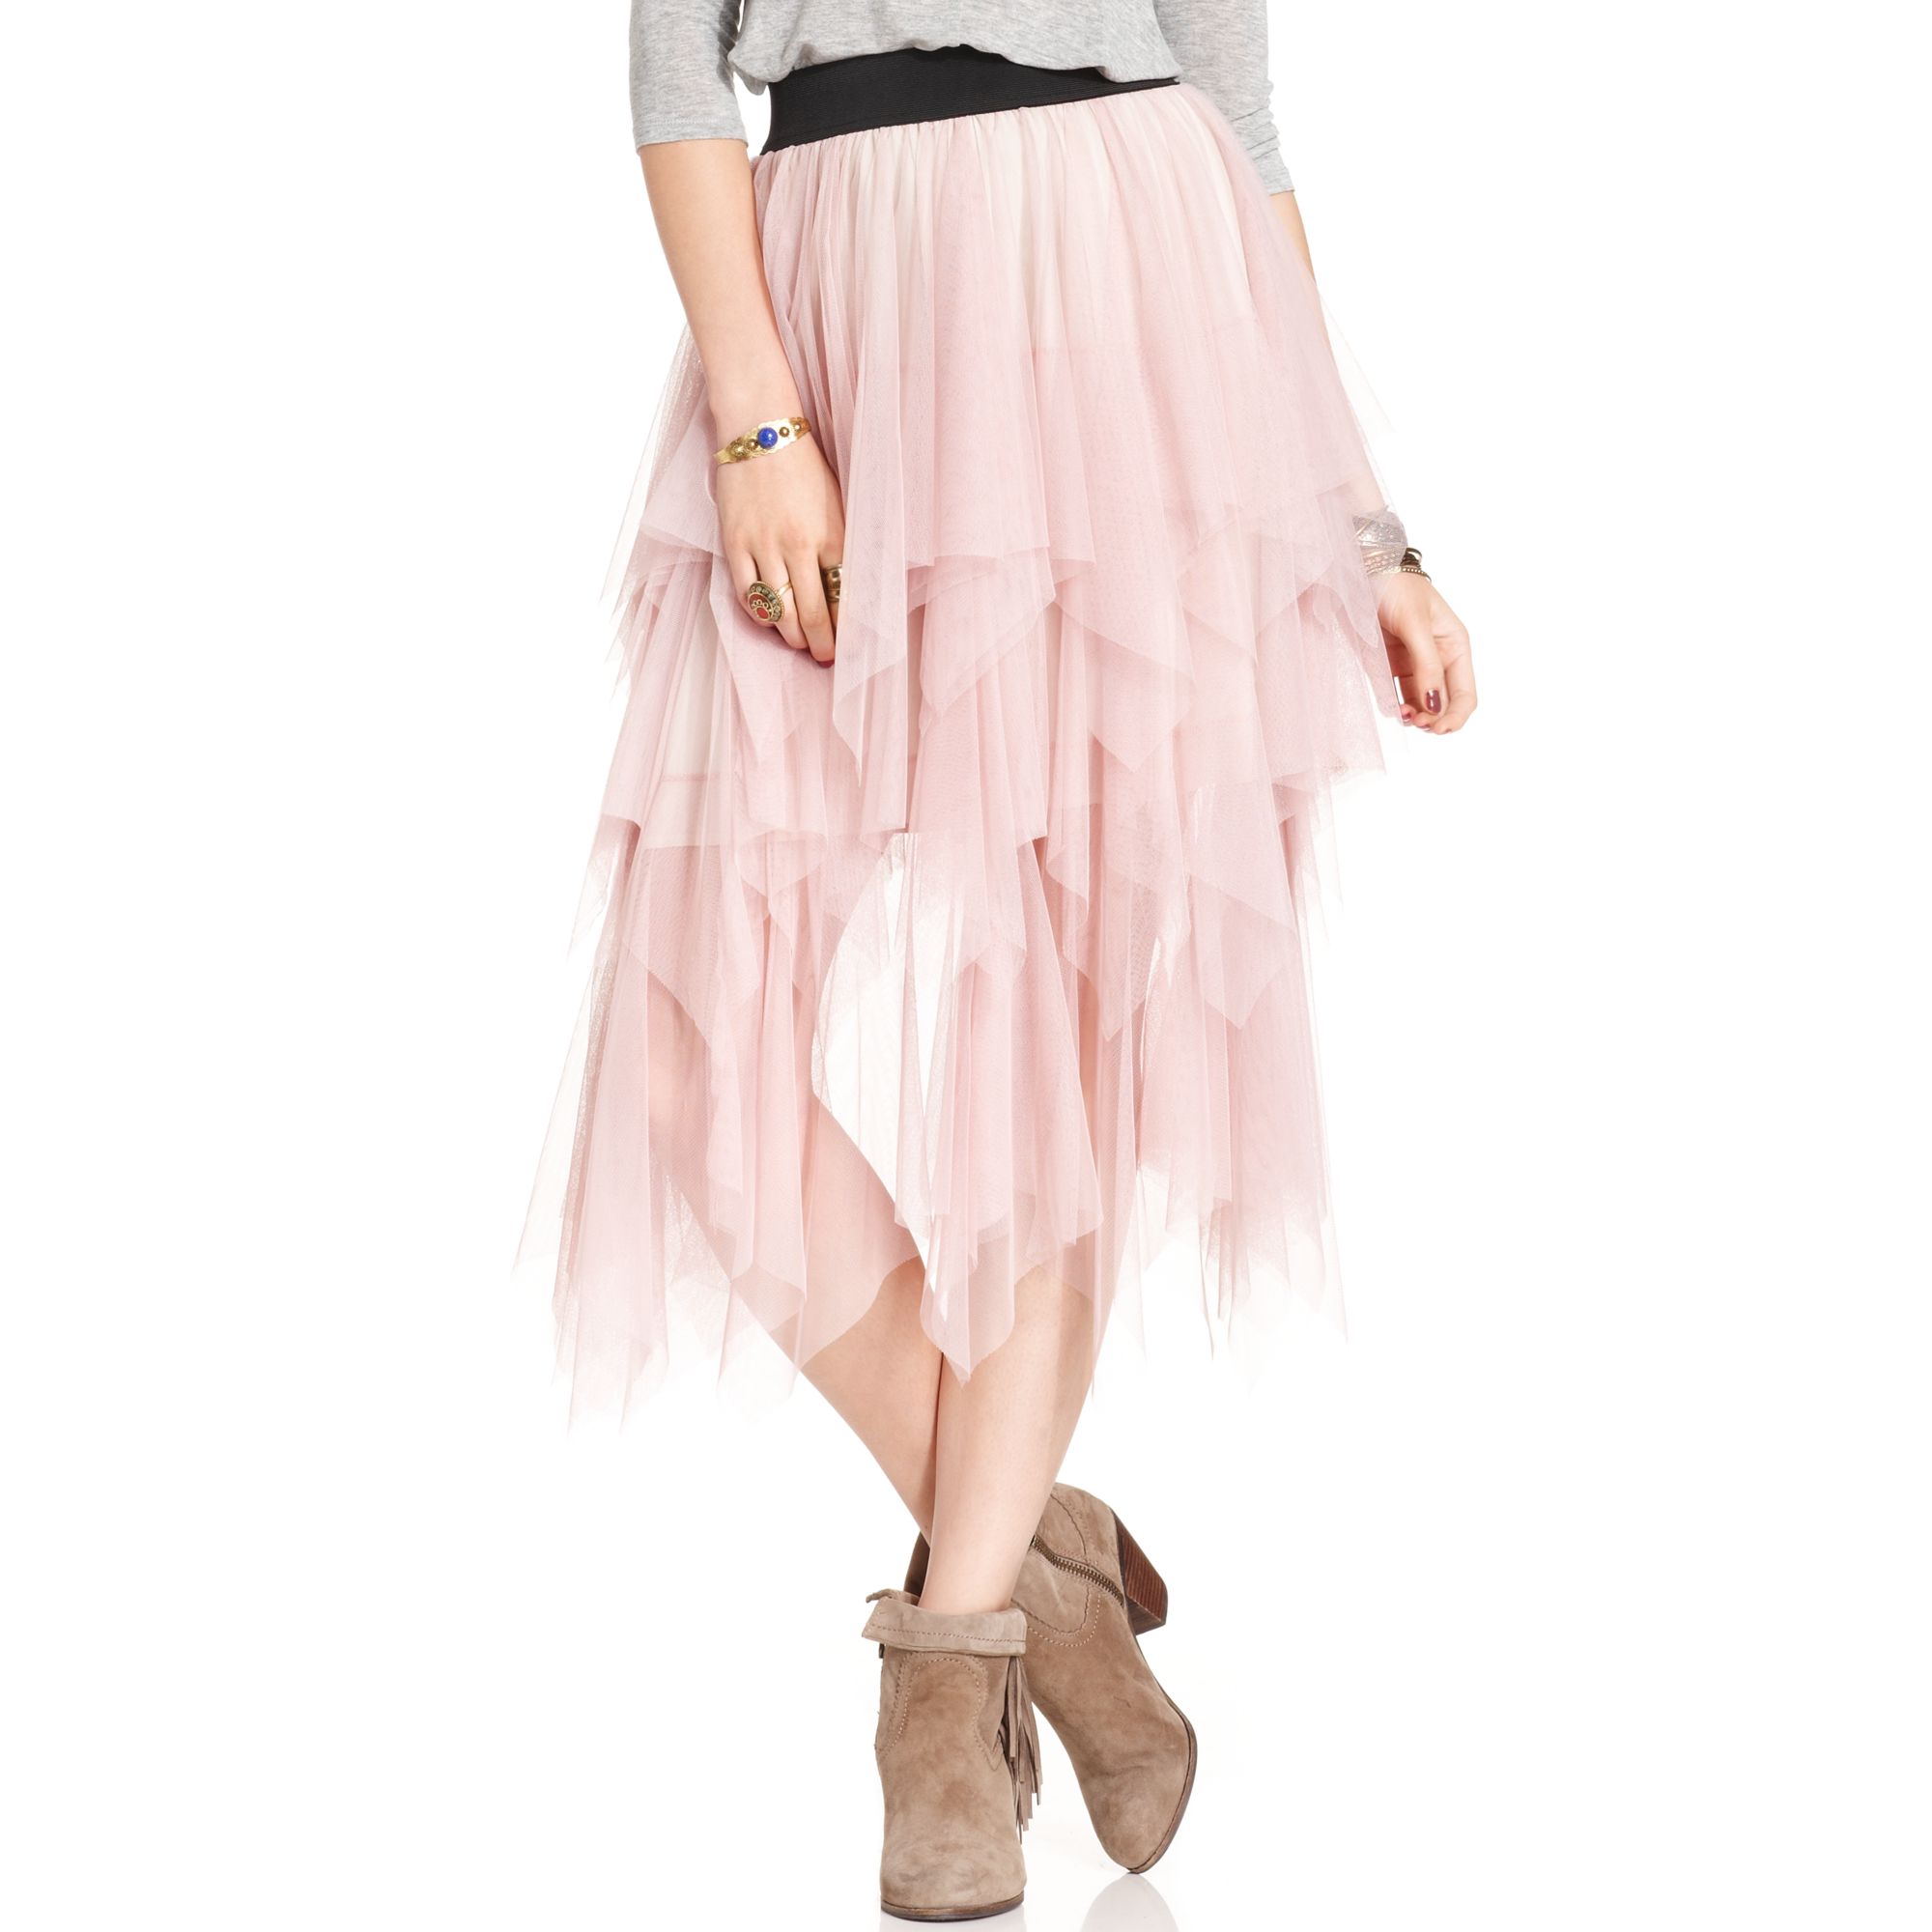 Lyst - Free People Tiered Ruffled Tulle Midi Skirt in Pink